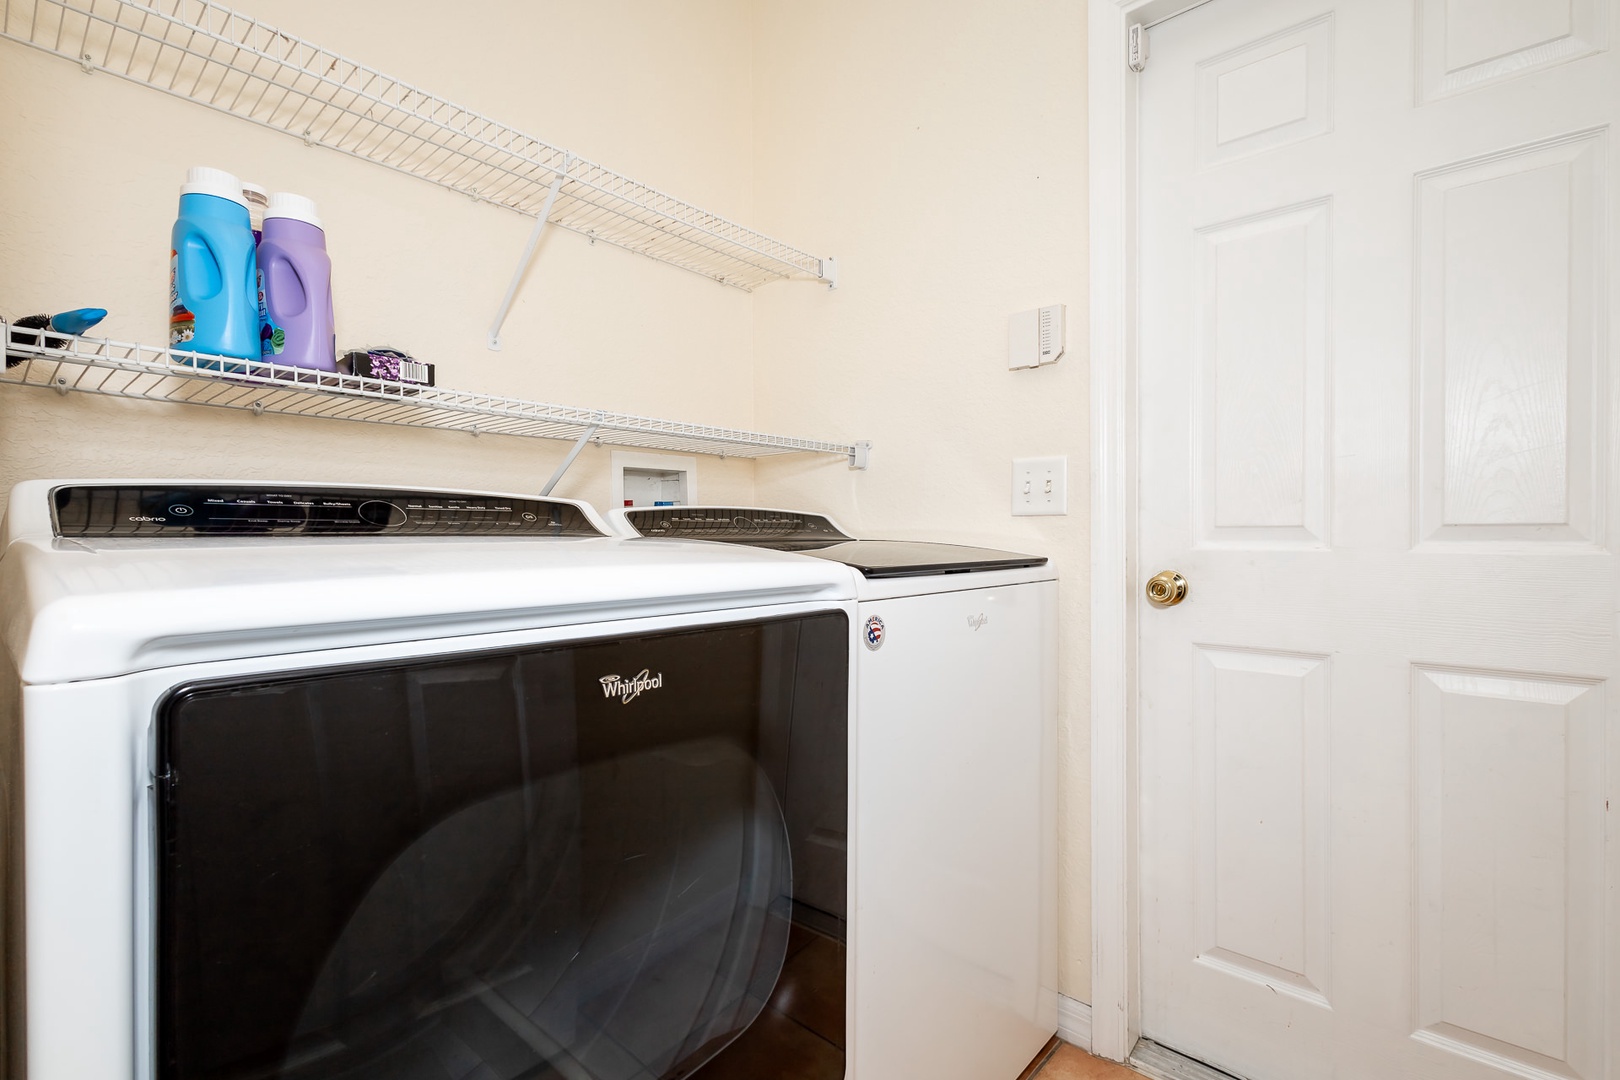 Washer and dryer in-unit